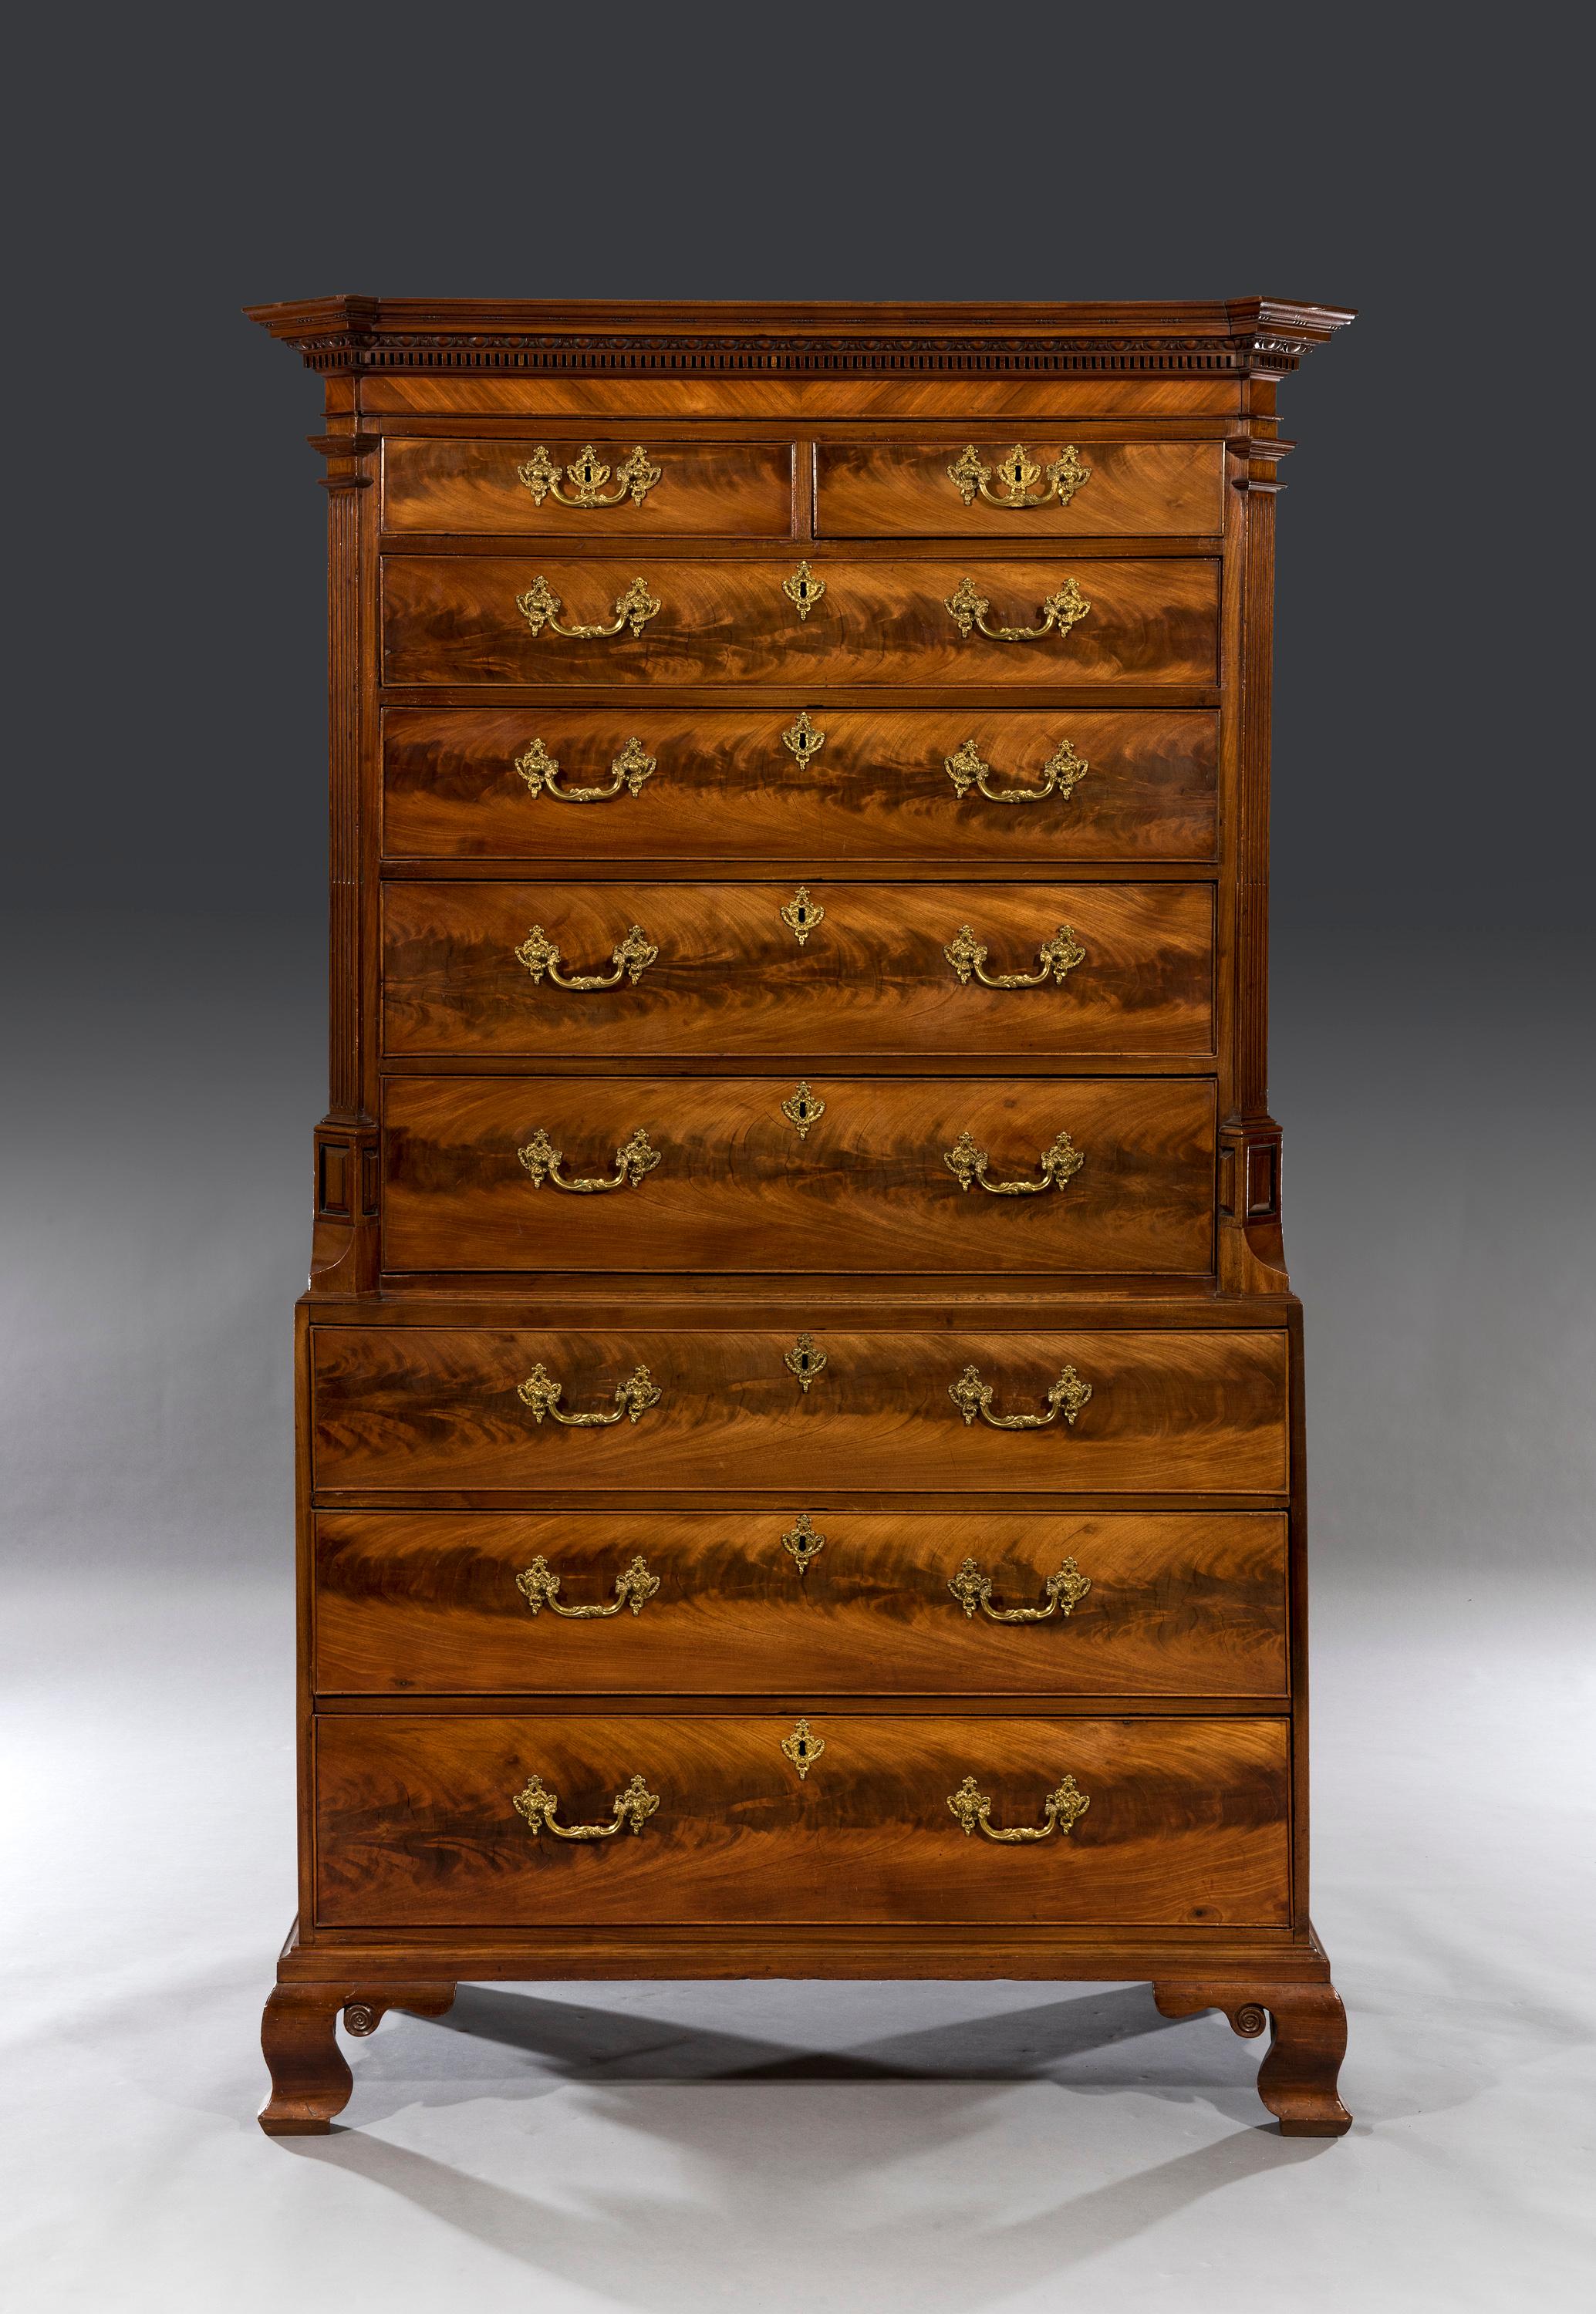 The top section is decorated with an 'egg & dart' moulding and a dental cornice with out-set corners above two short and four long graduated drawers flanked by fluted canted corners. The full length oak lined drawers retain the original locks and